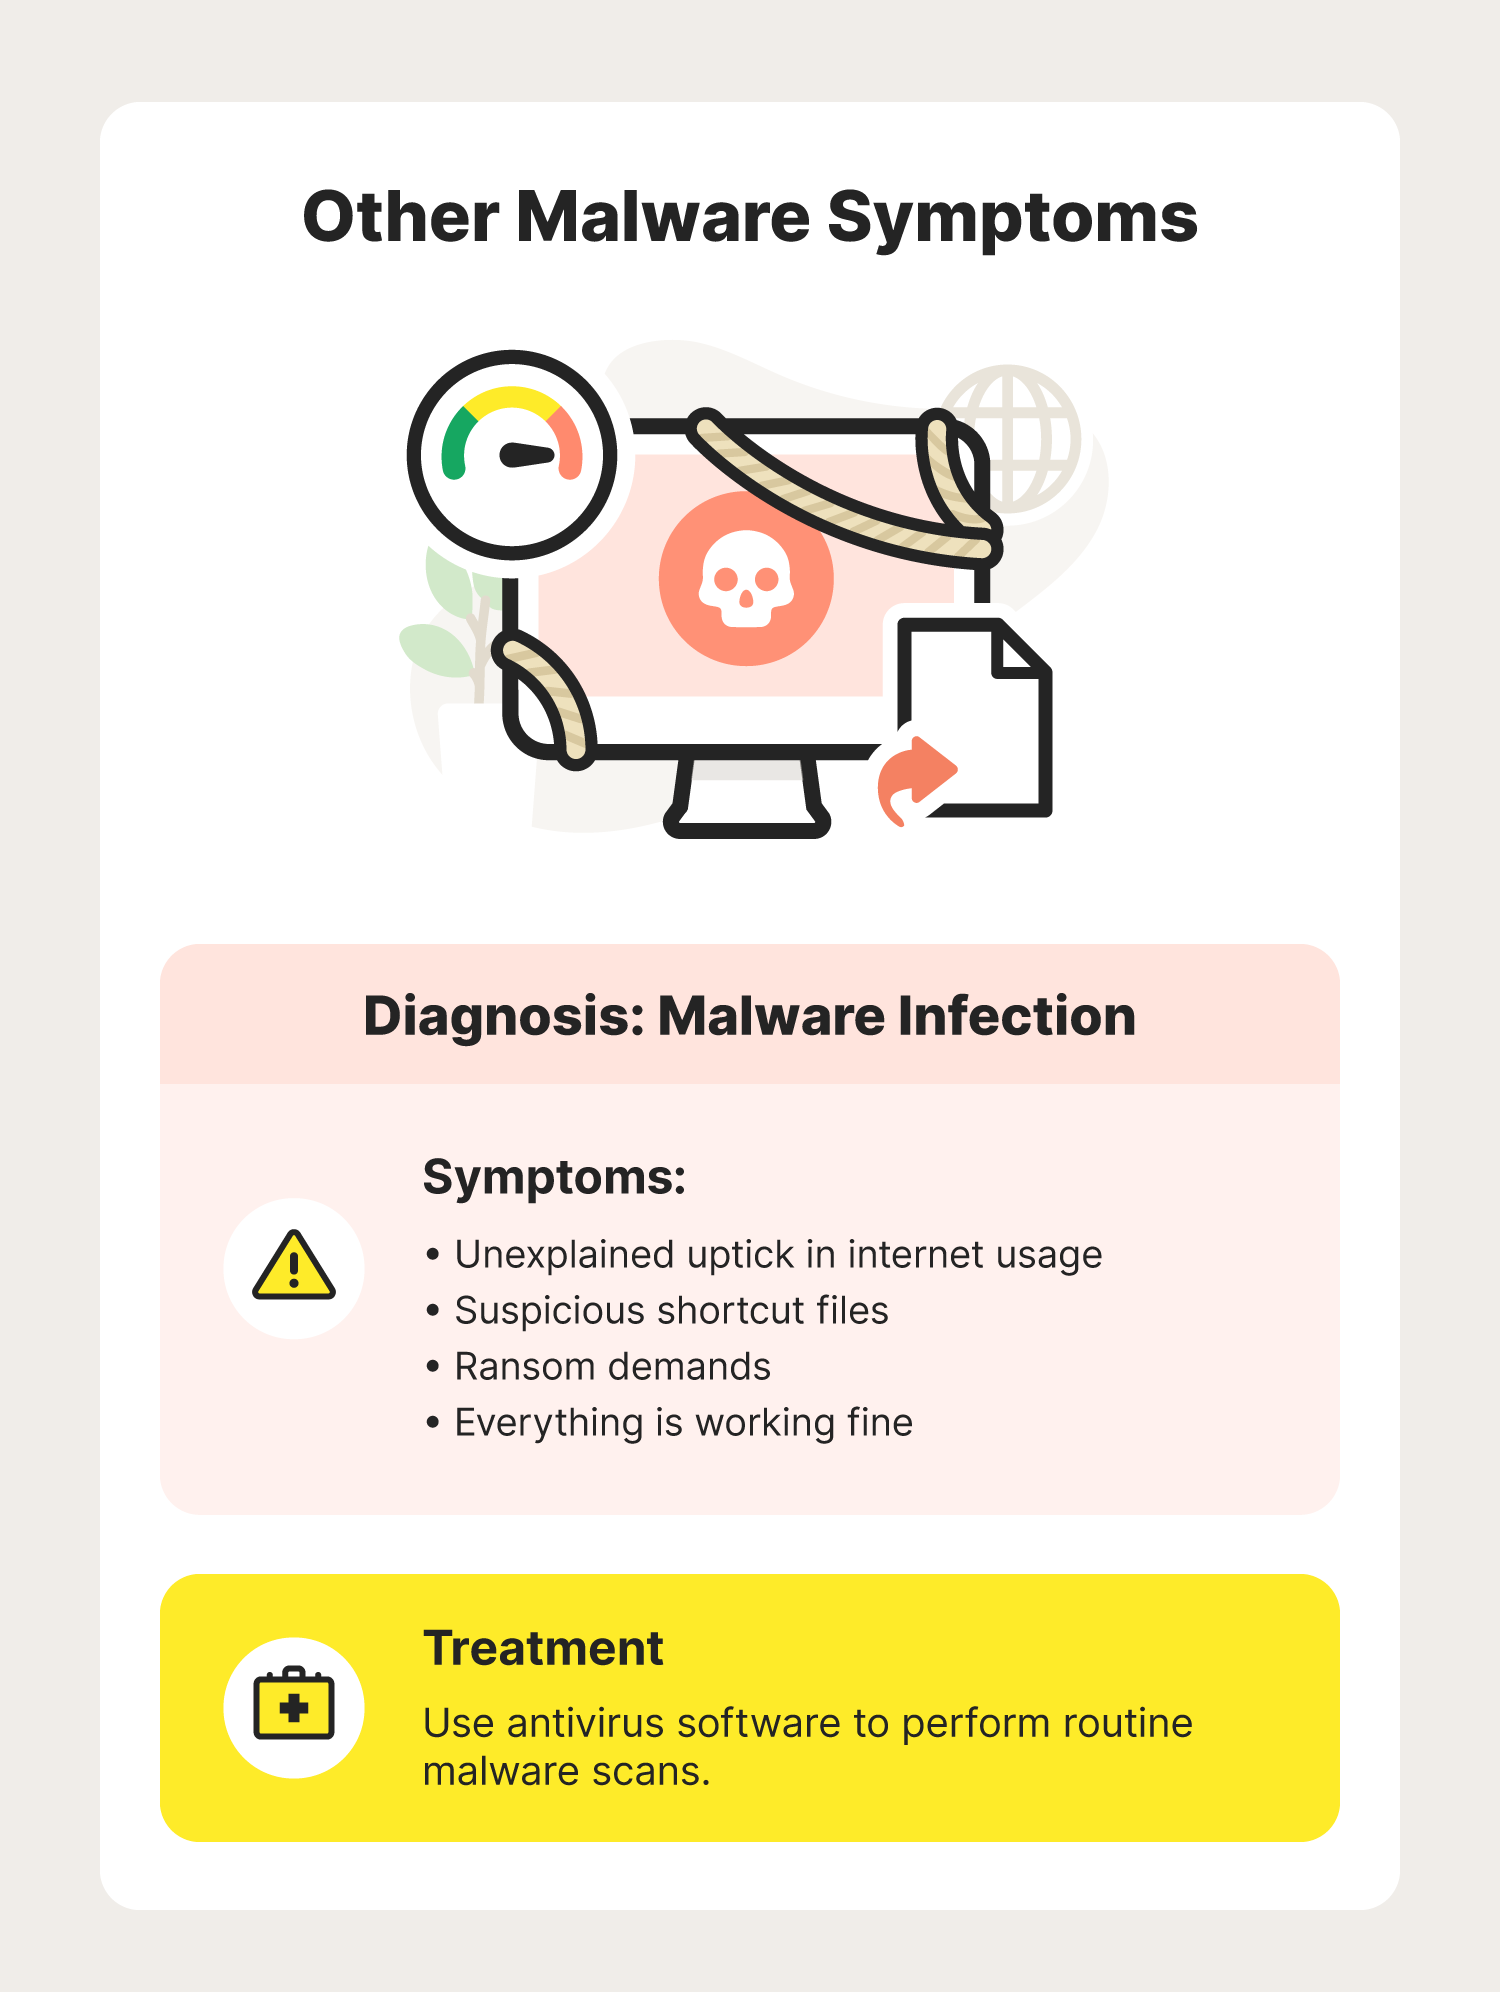 A graphic showcases other suspicious symptoms that are signs of malware.